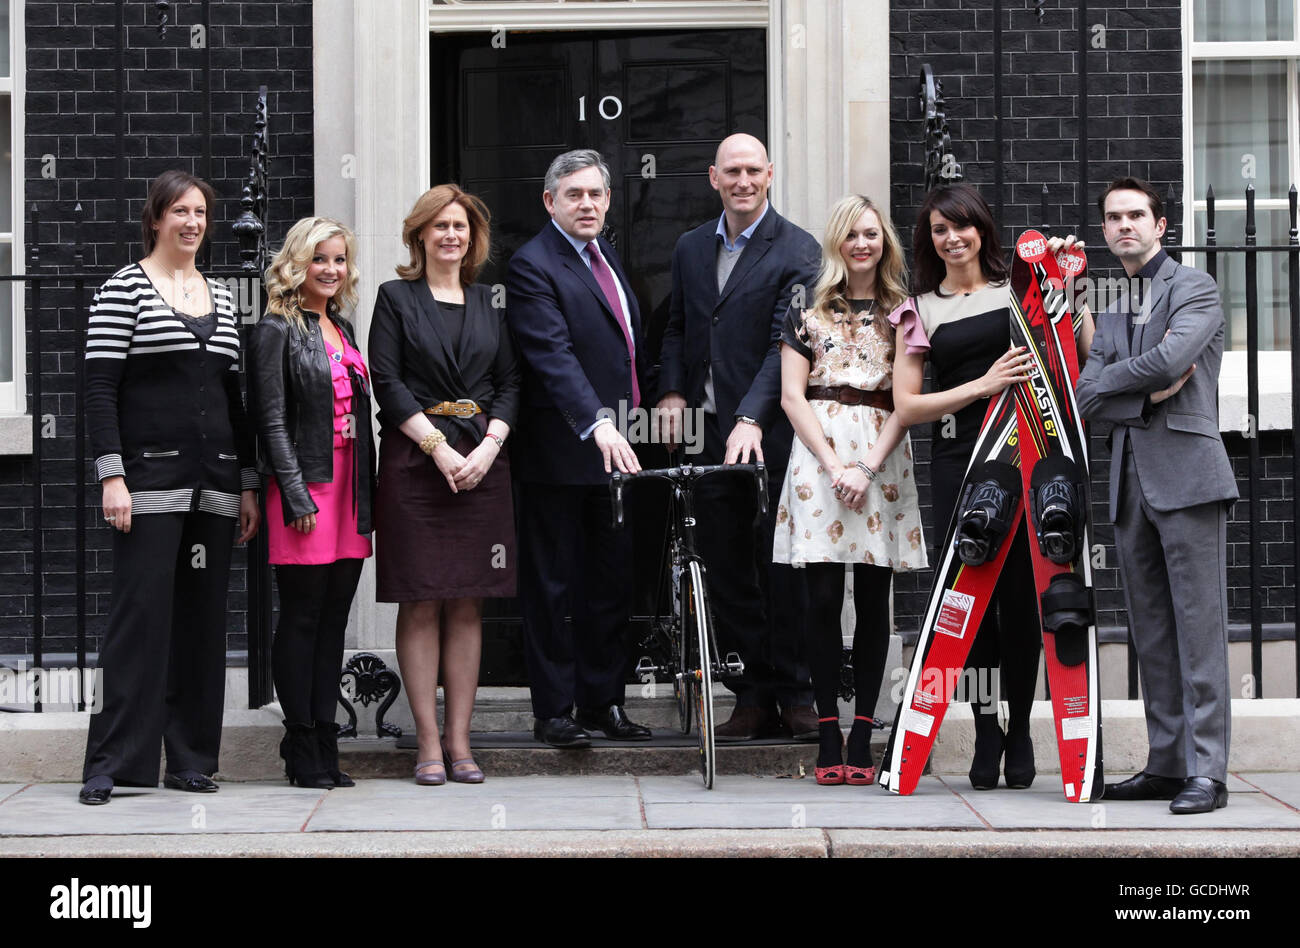 Prime Minister Gordon Brown and wife Sarah meet Sport Relief celebrity challengers (from left) Miranda Hart, Helen Skelton, Lawrence Dallaglio, Fearne Cotton, Christine Bleakley and Jimmy Carr, who have raised money as part of Sport Relief, outside No 10 Downing Street in central London. Stock Photo